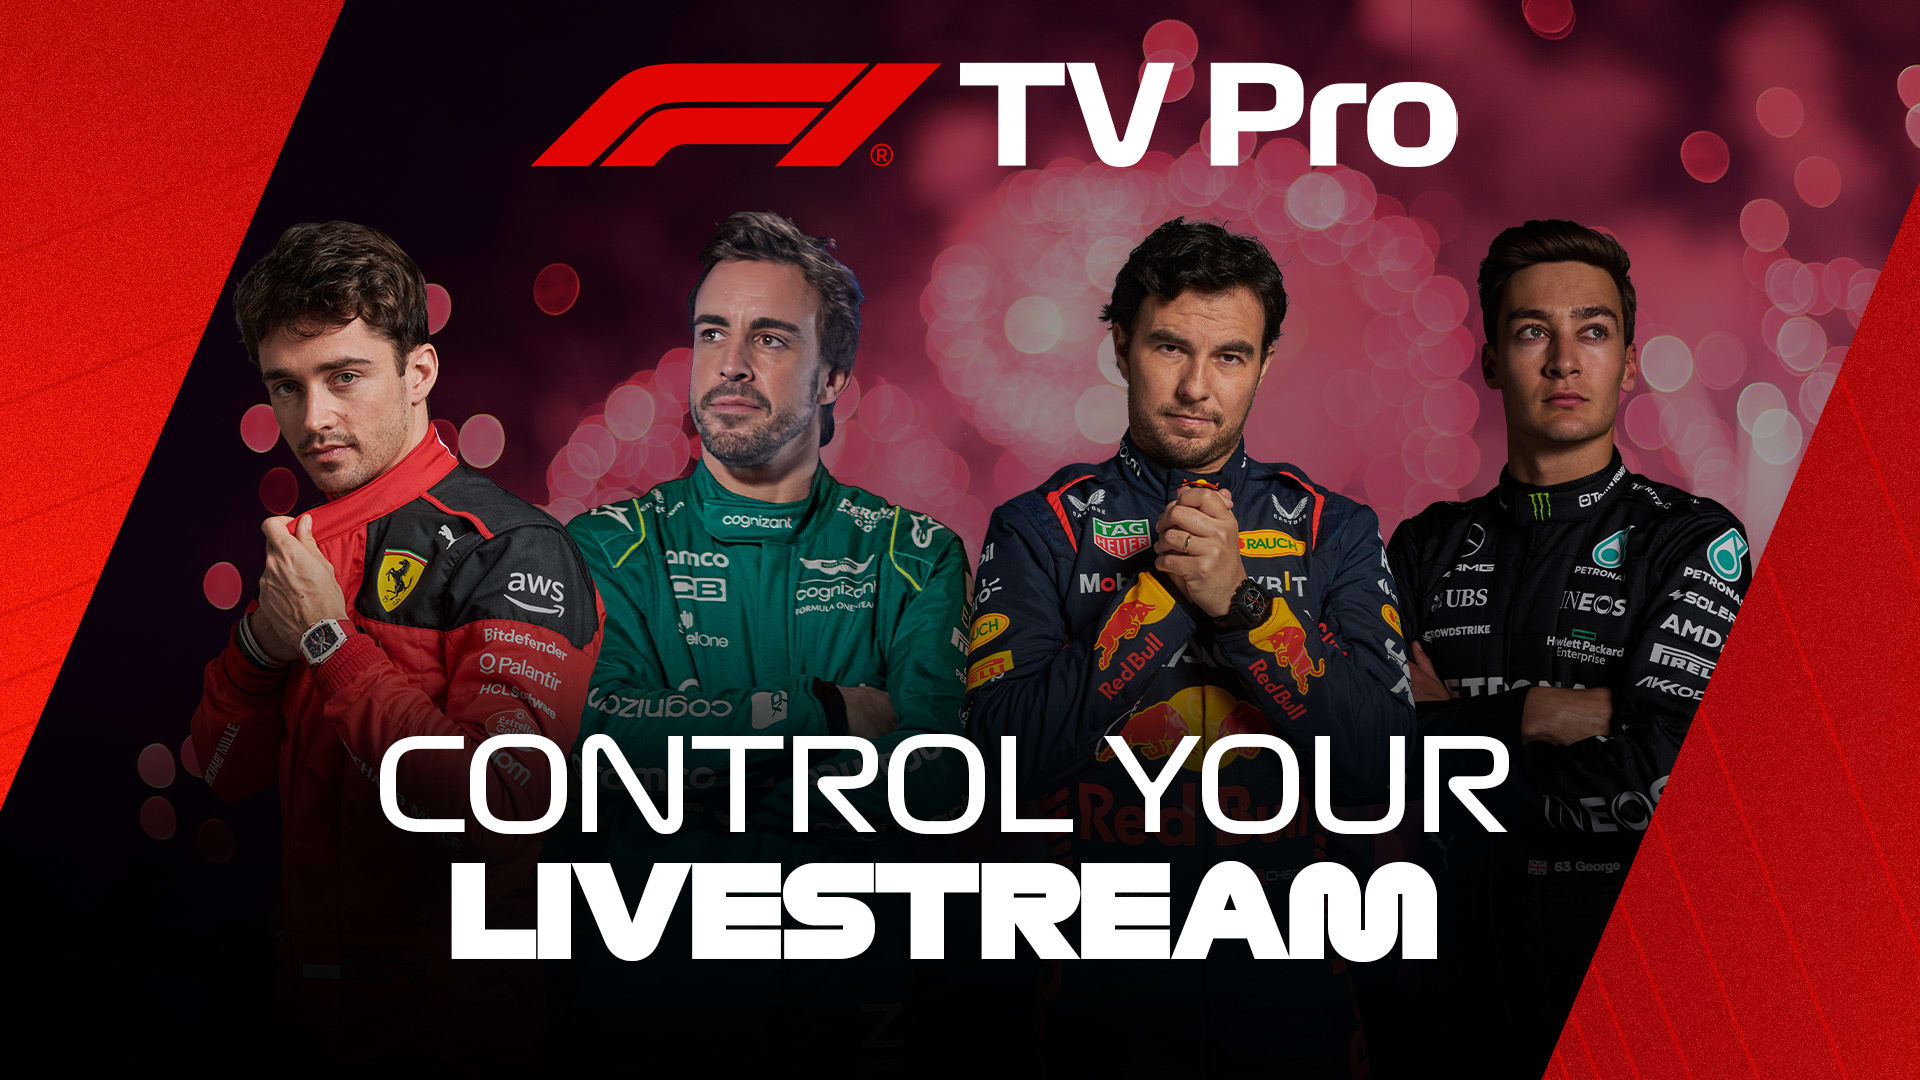 How to stream the 2023 Japanese Grand Prix on F1 TV Pro Formula 1®